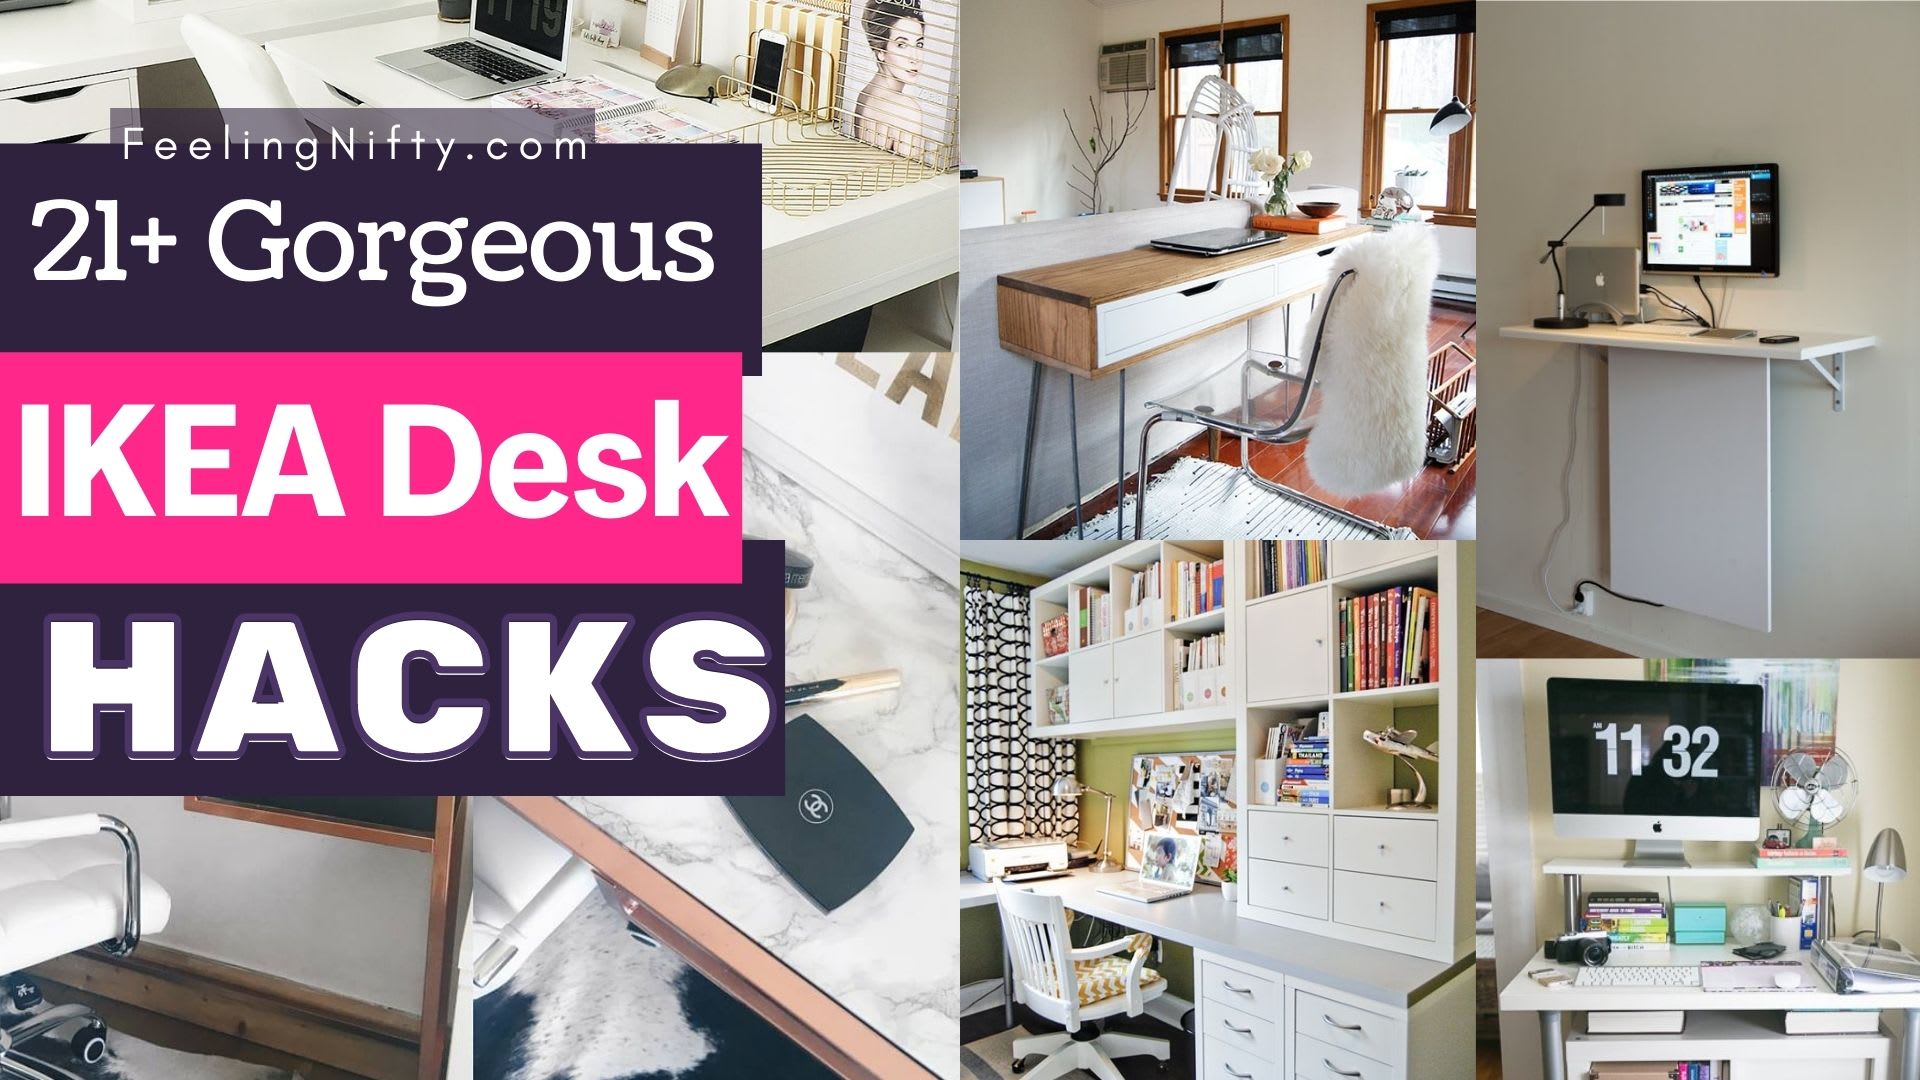 IKEA Office Storage Design Ideas and Hacks for Your Home